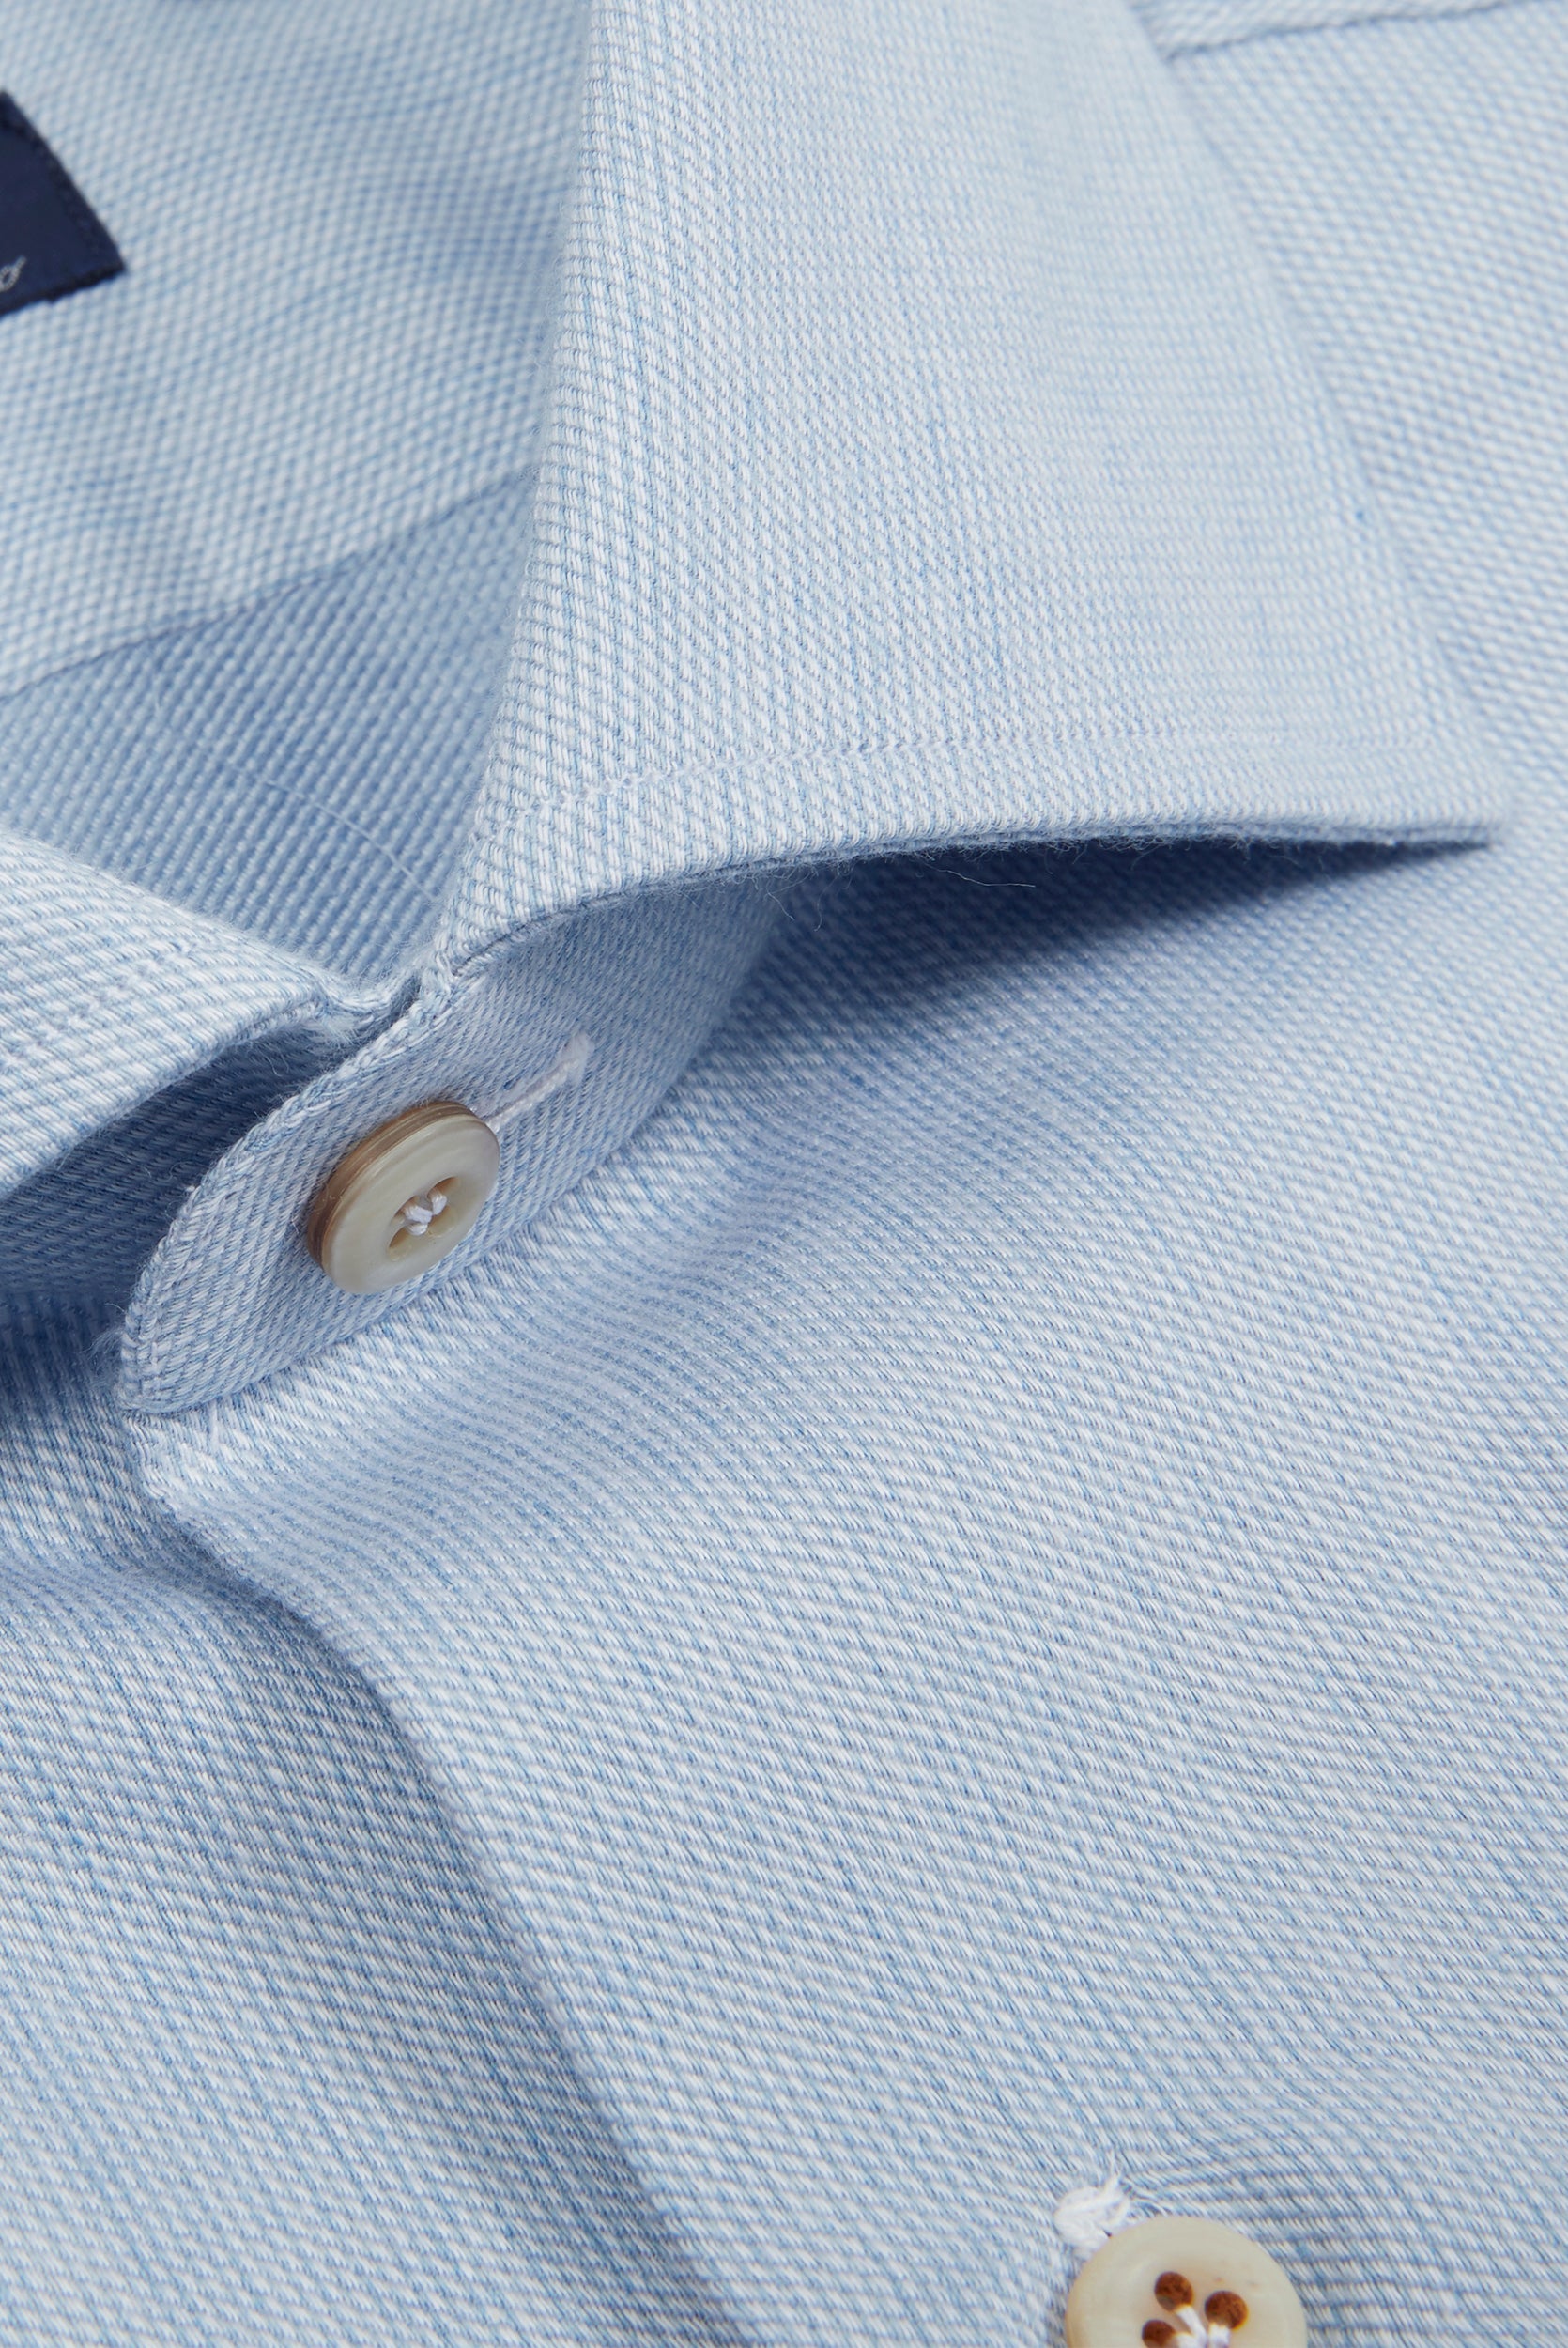 Detail of Finamore Napoli Shirt in Light Blue